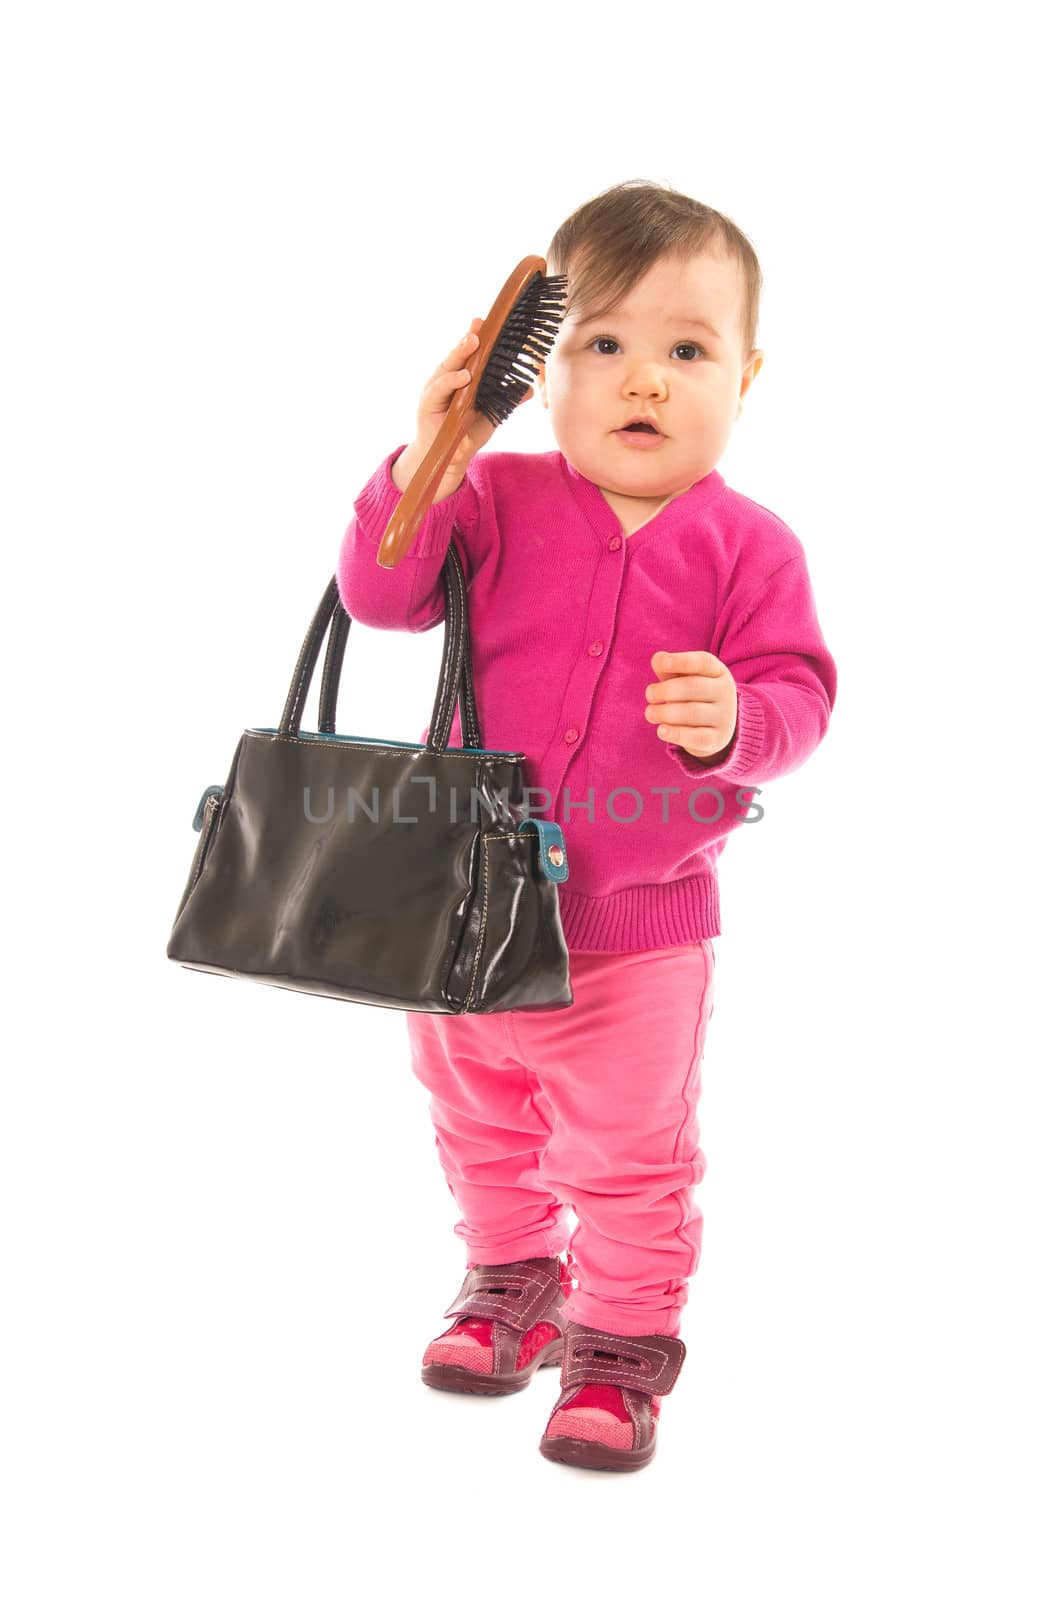 Baby girl with comb and hand bag over white